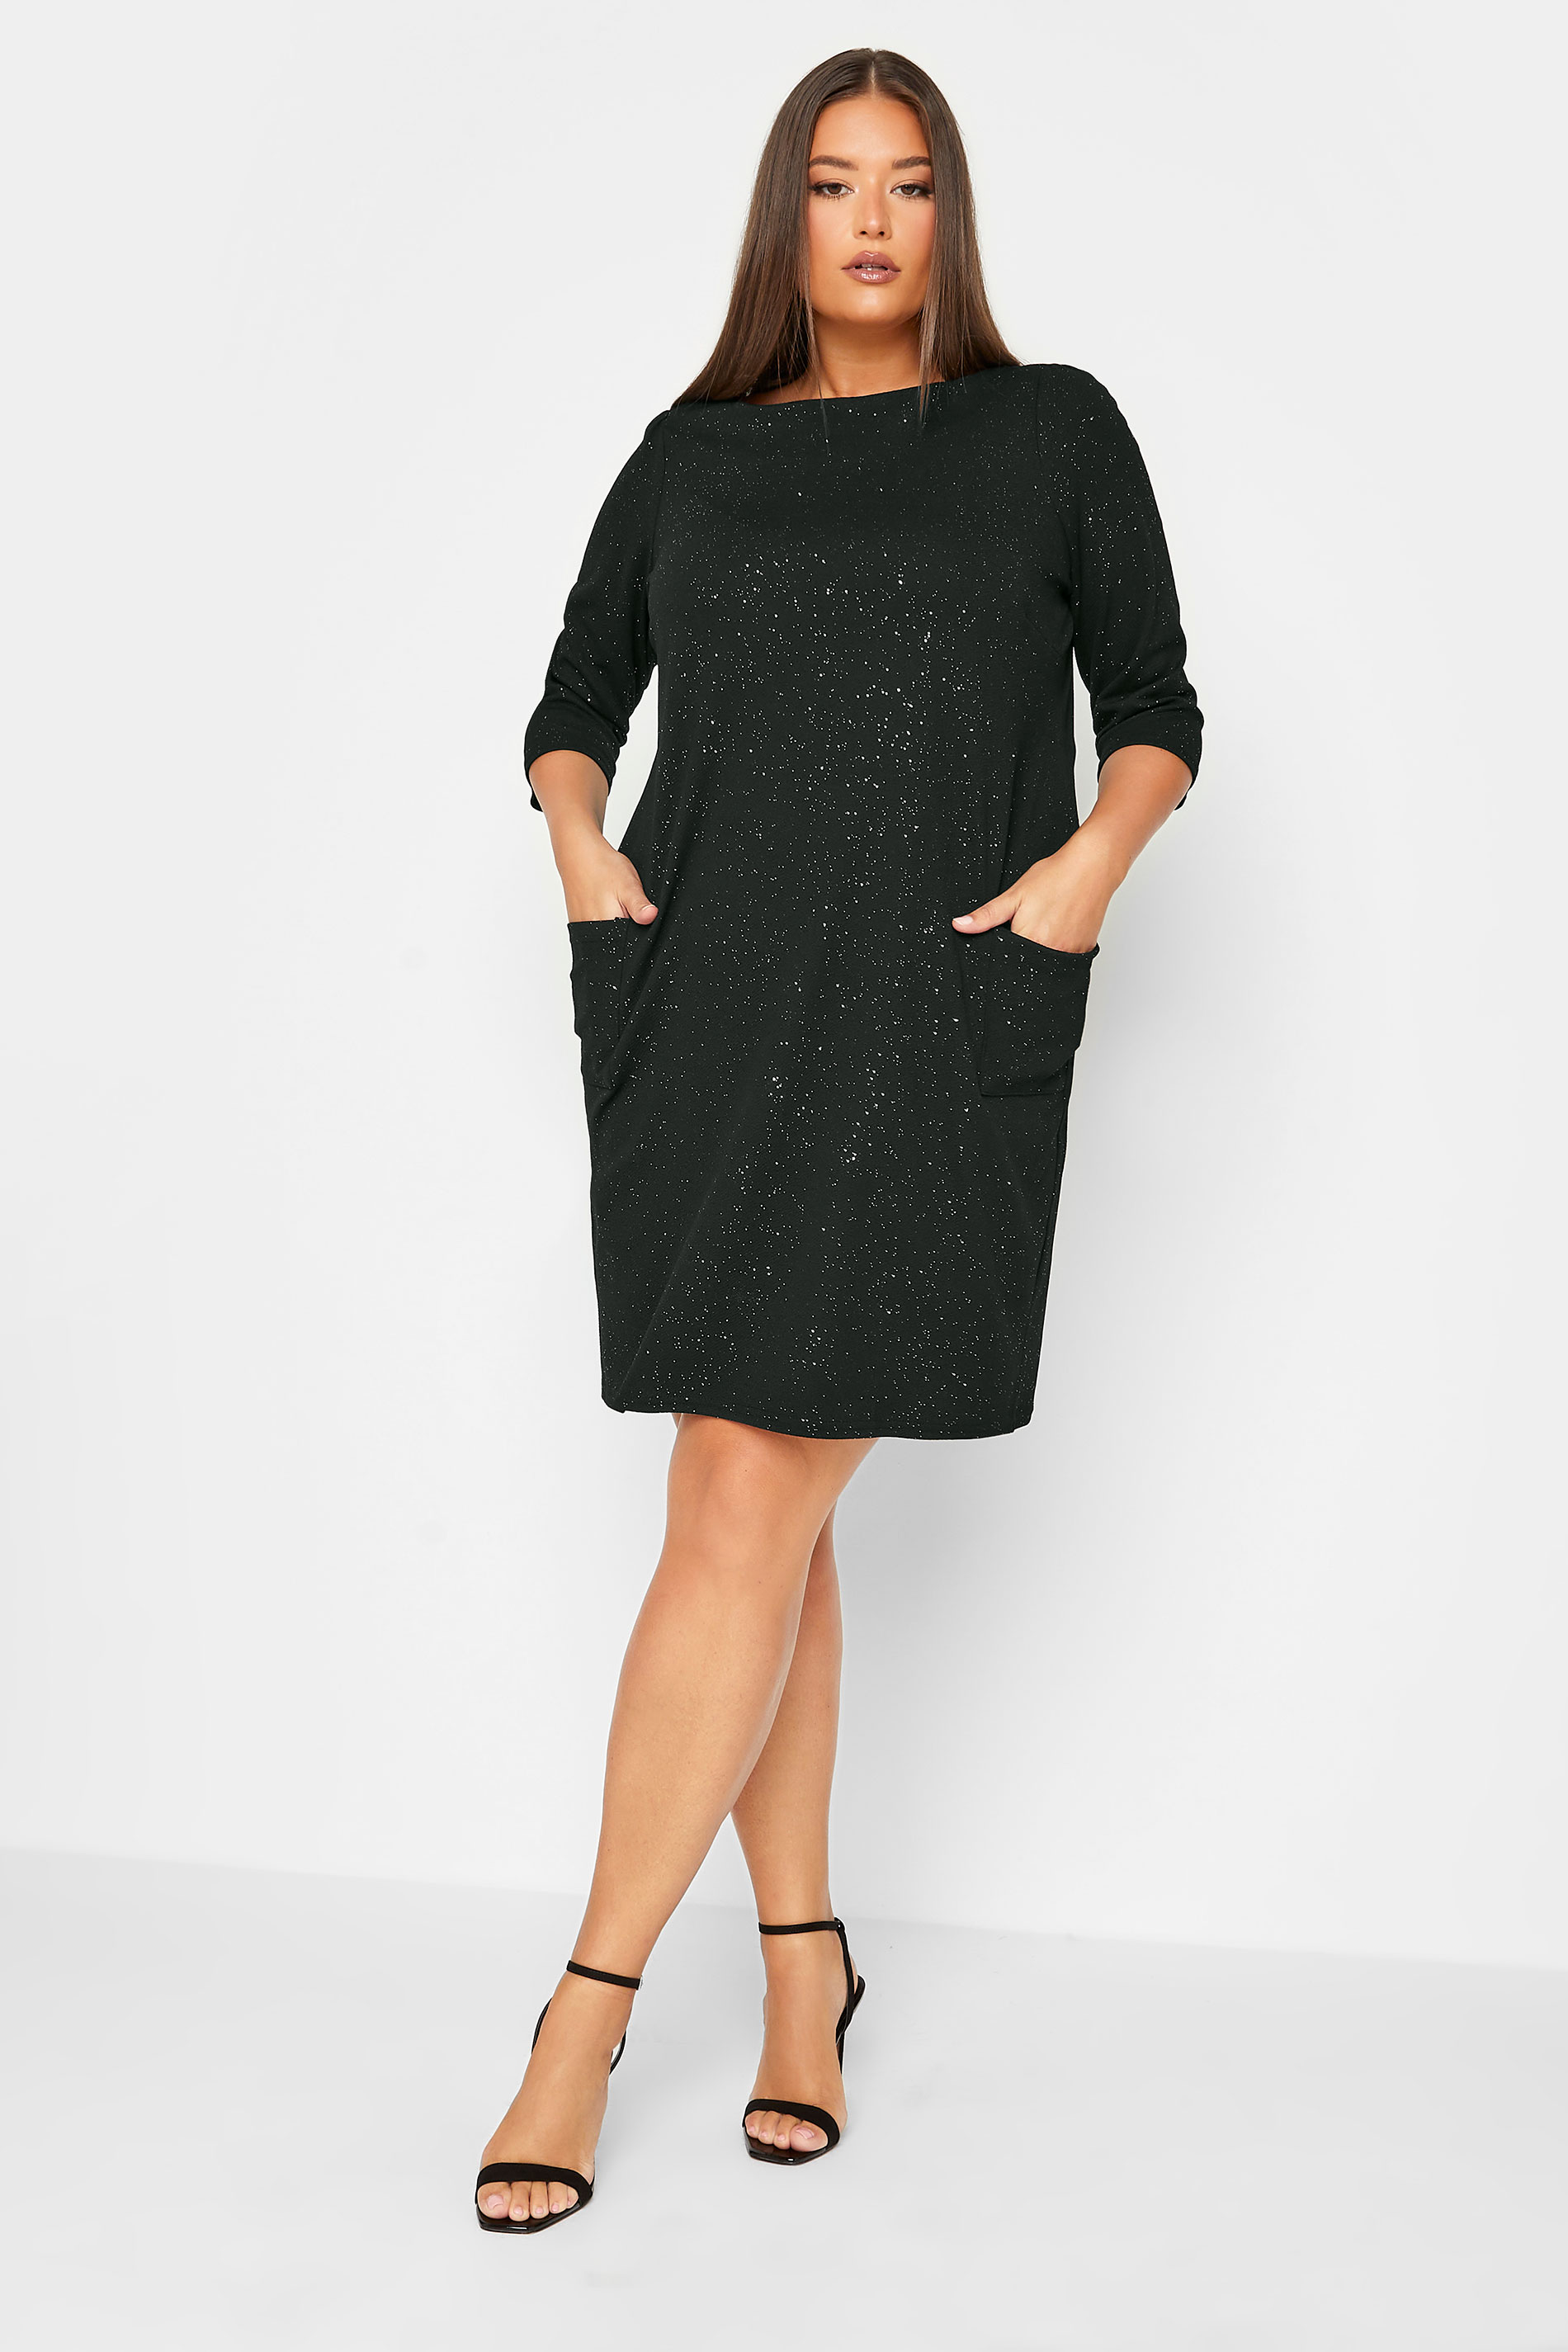 Plus Size Black & Silver Glitter Tunic Dress | Yours Clothing 1